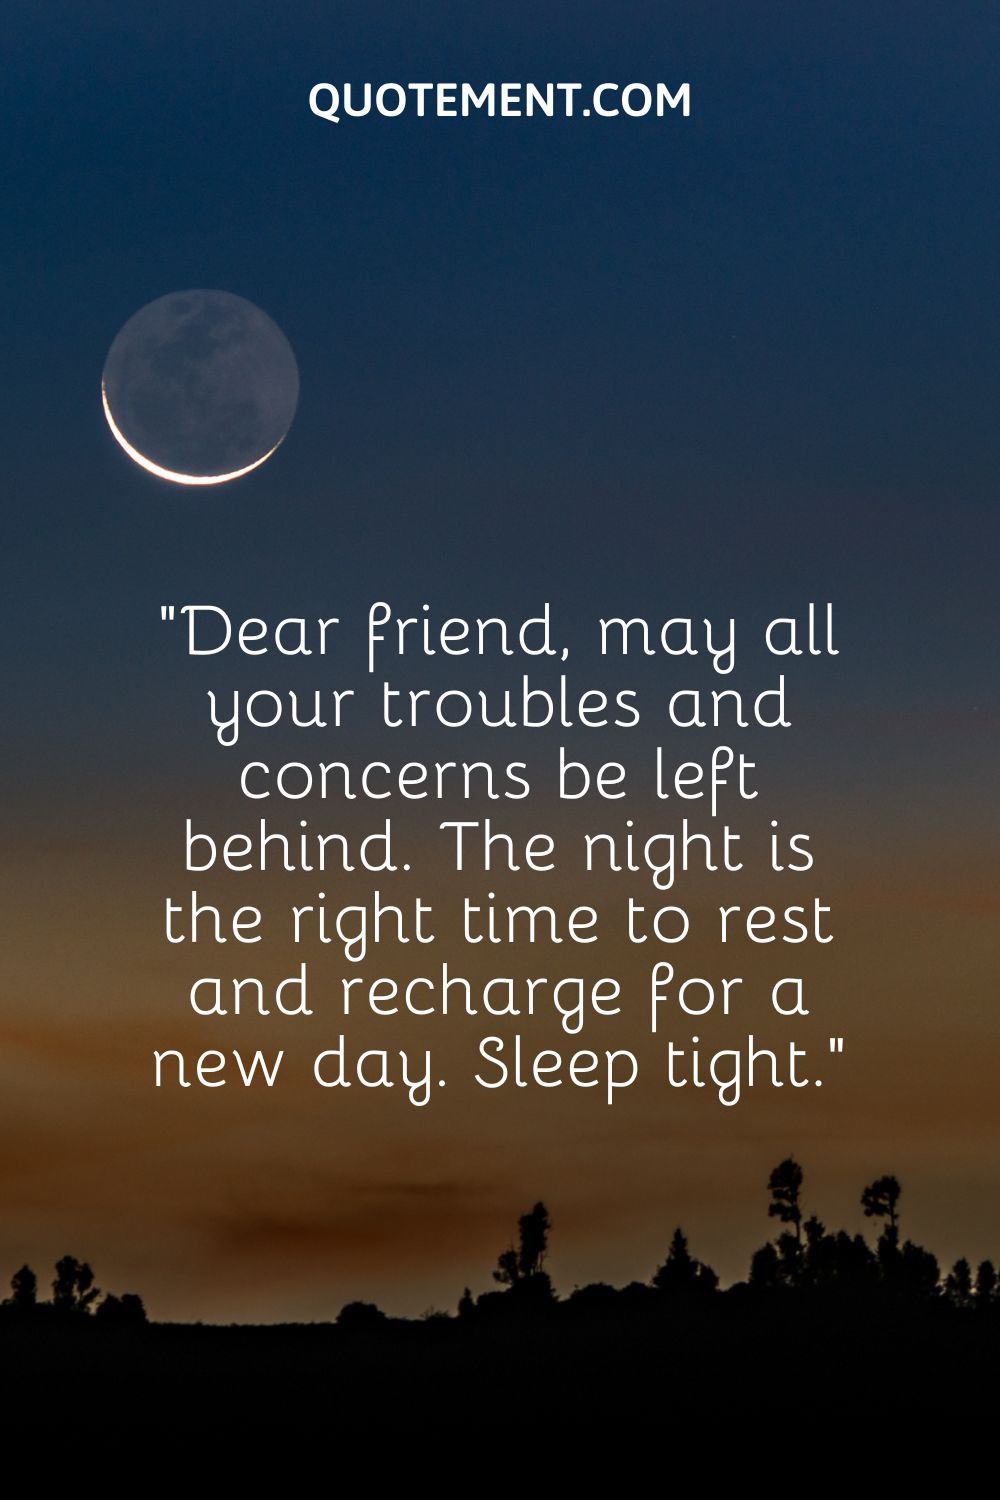 Dear friend, may all your troubles and concerns be left behind